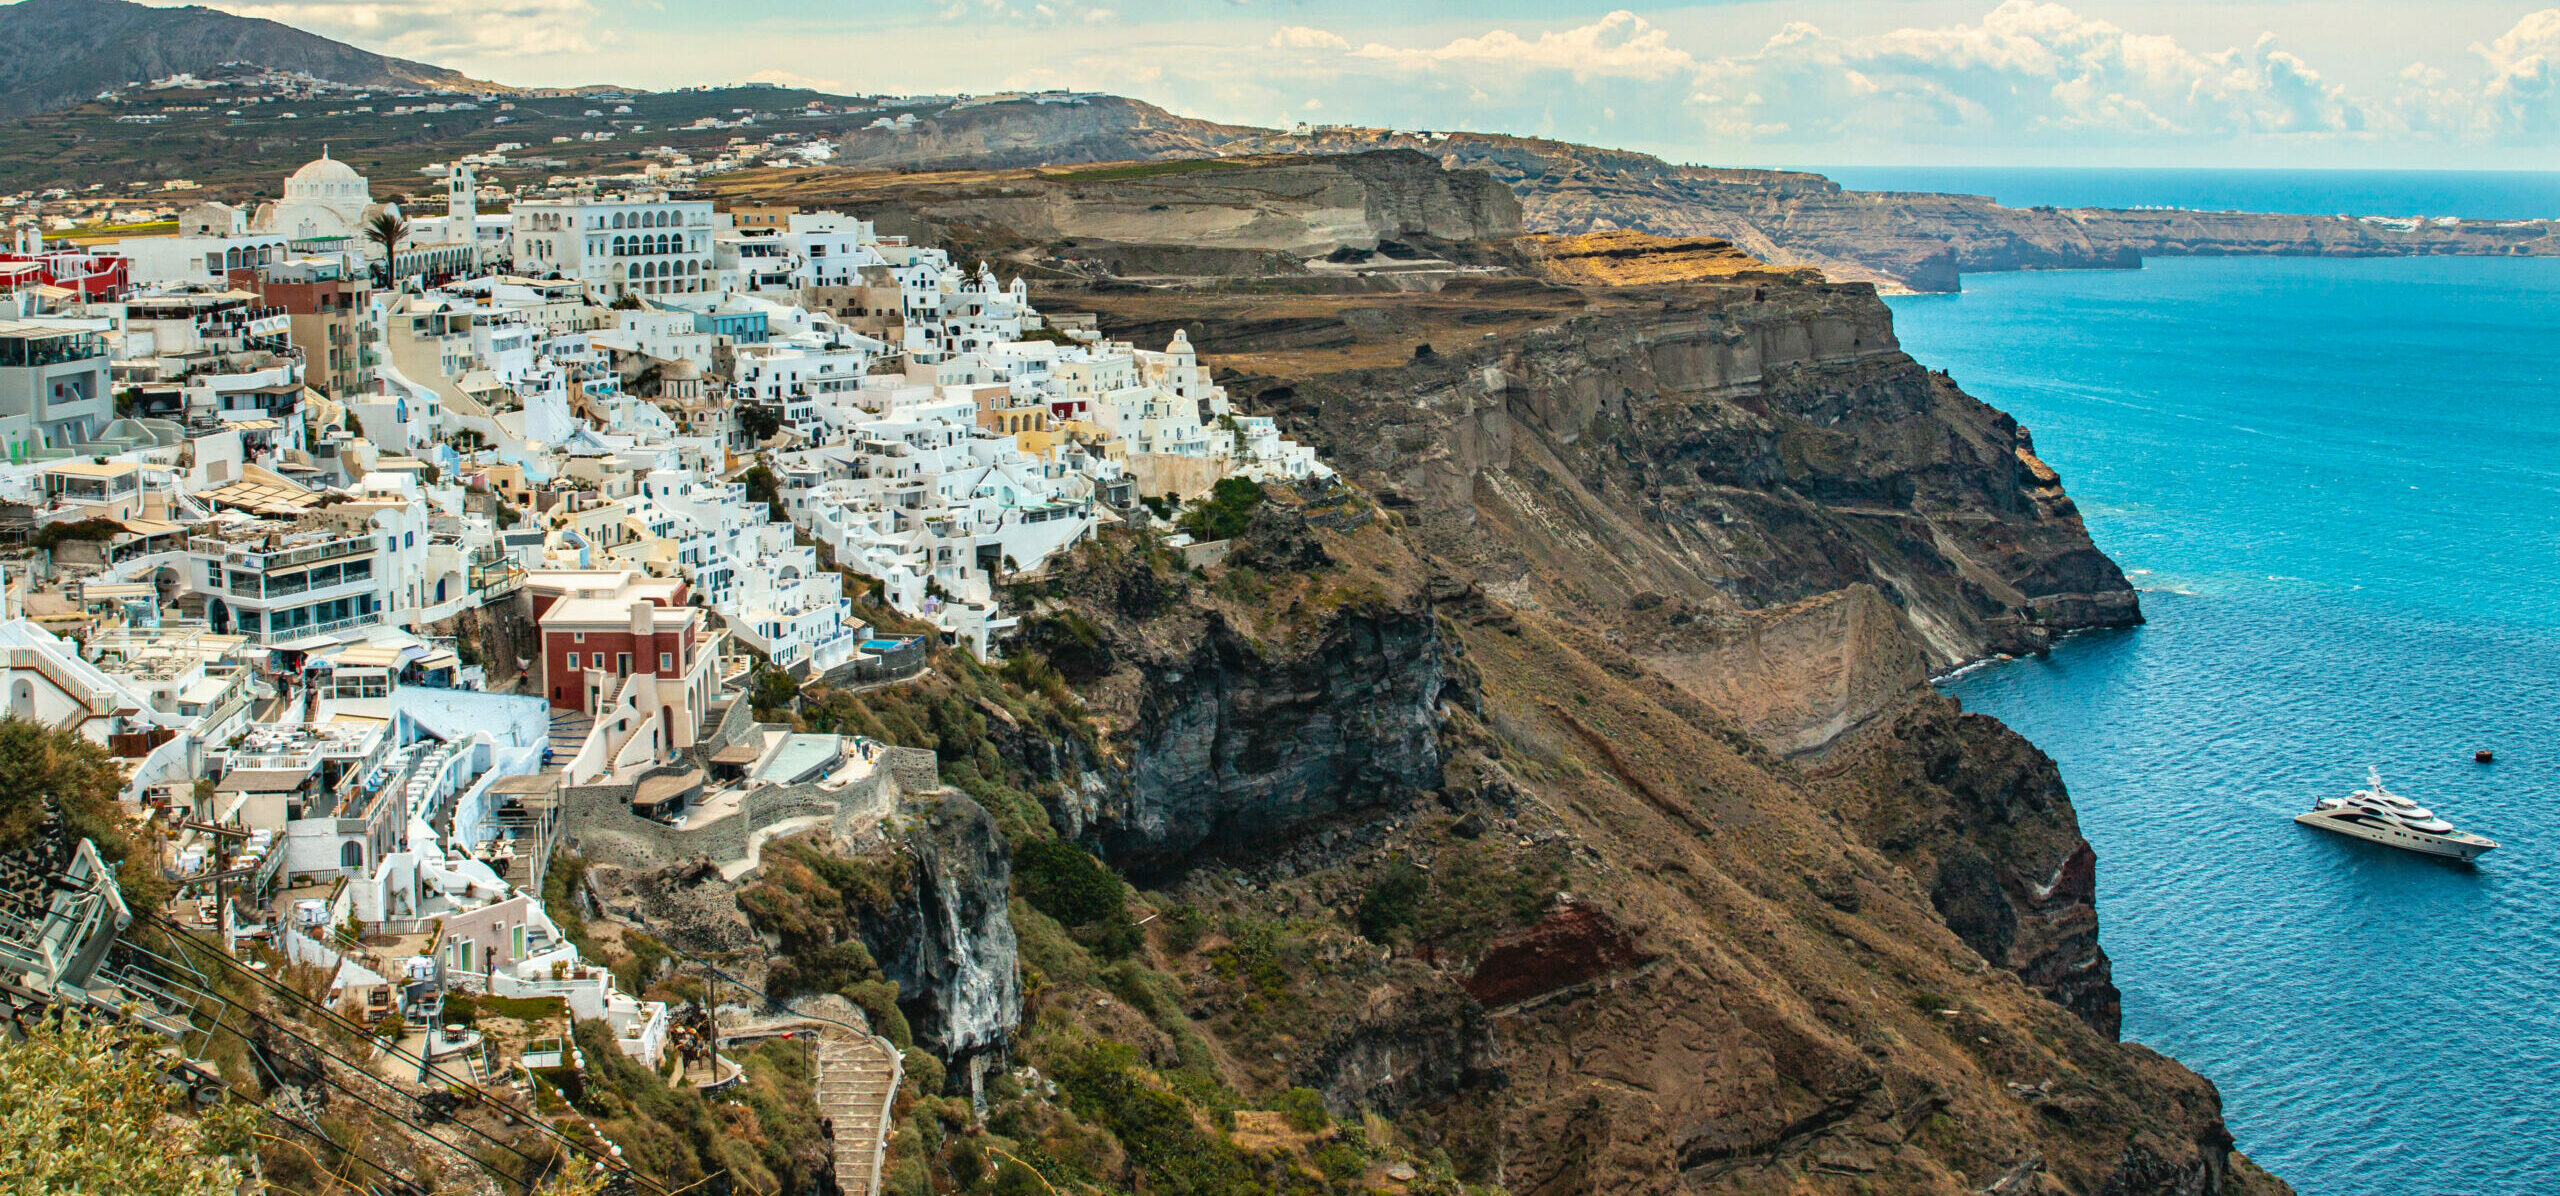 Caldera: The seductive one in the Cyclades